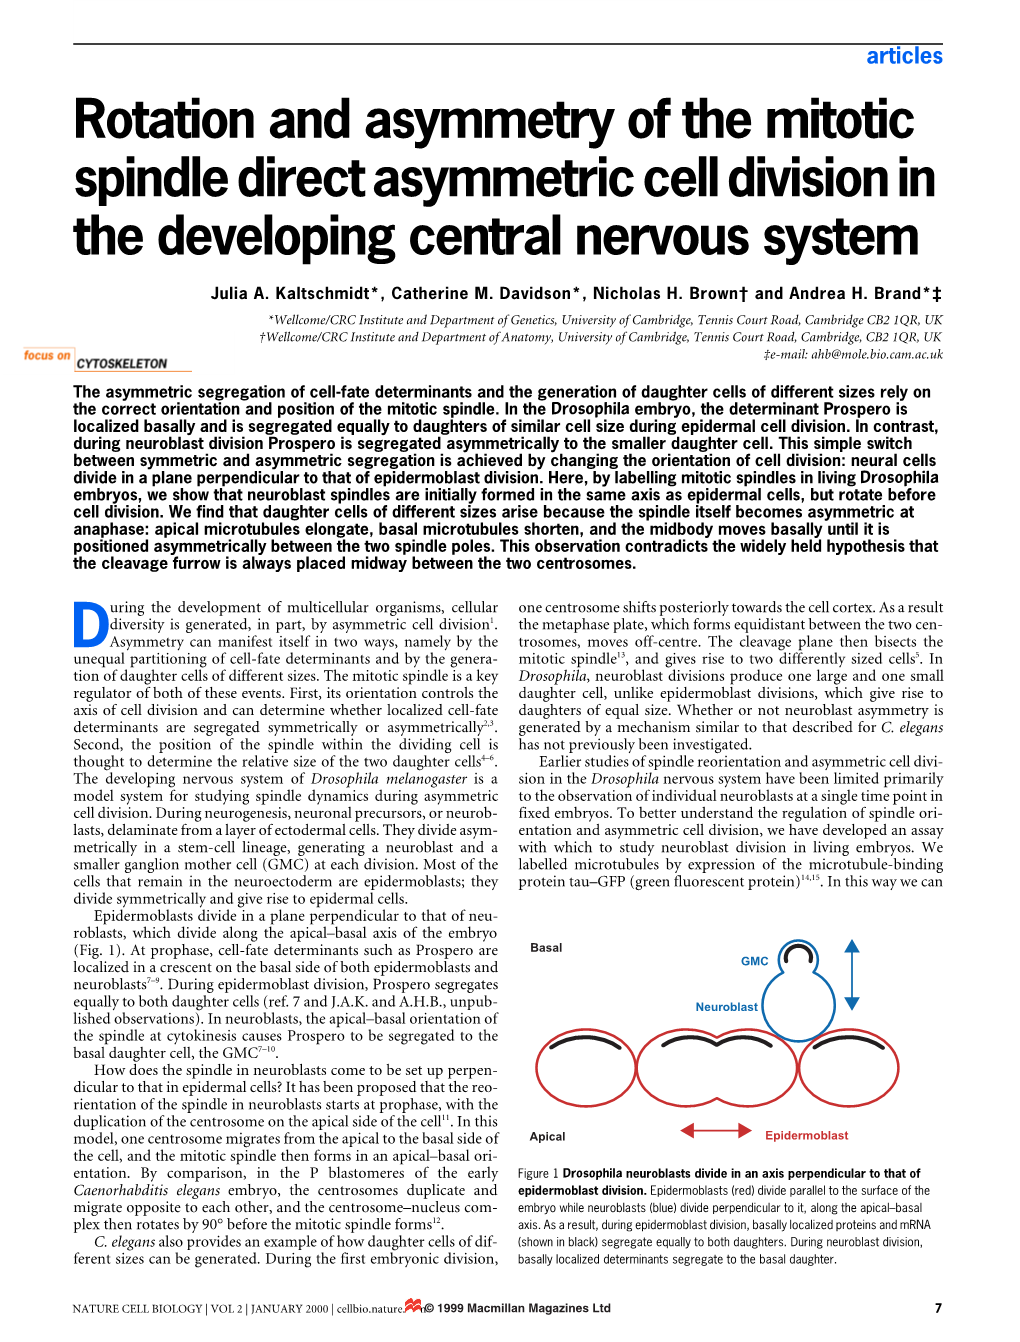 Rotation and Asymmetry of the Mitotic Spindle Direct Asymmetric Cell Division in the Developing Central Nervous System